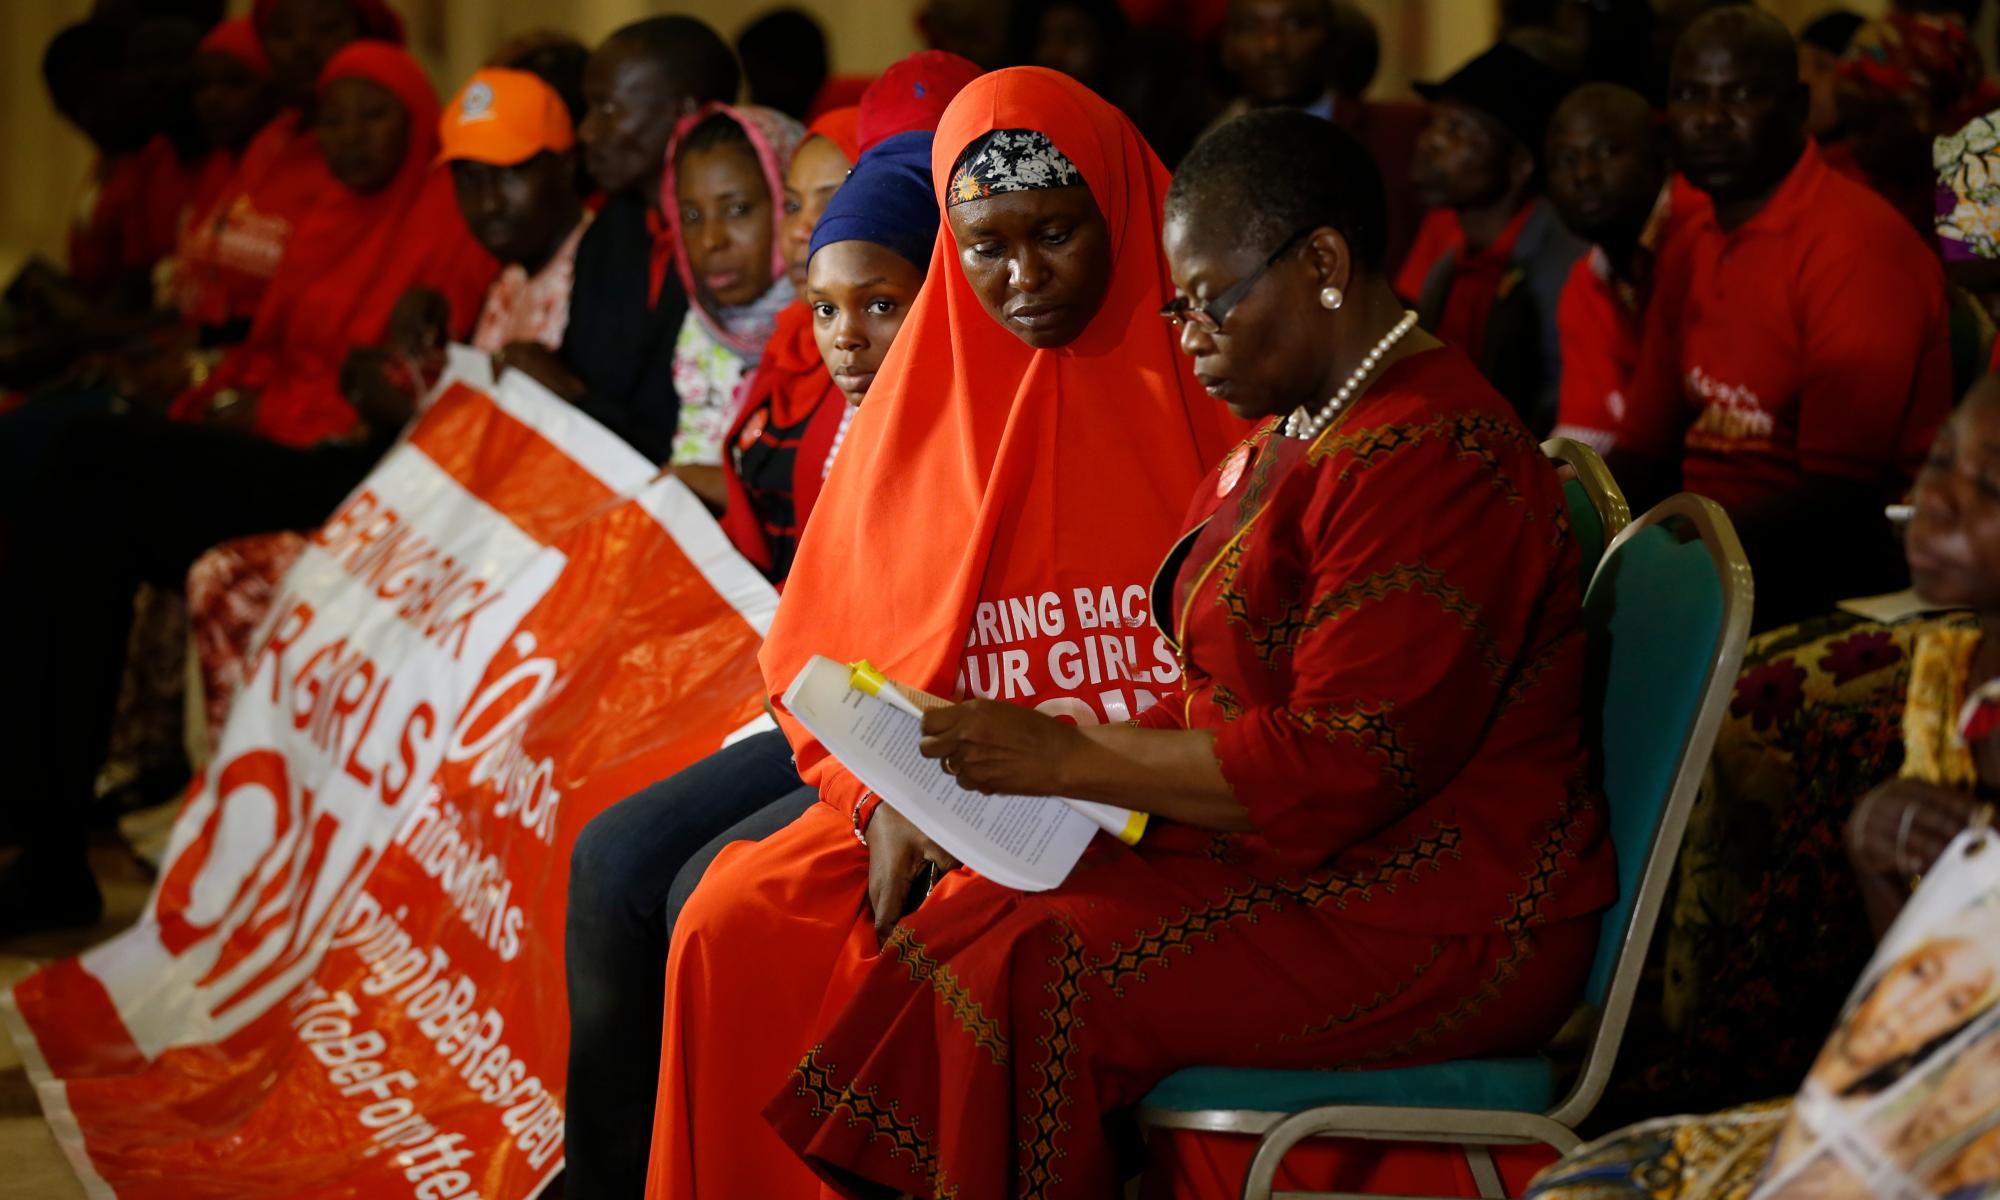 #bringbackourgirls fought to keep global attention on nigeria’s stolen chibok girls. ten years on it is still fighting